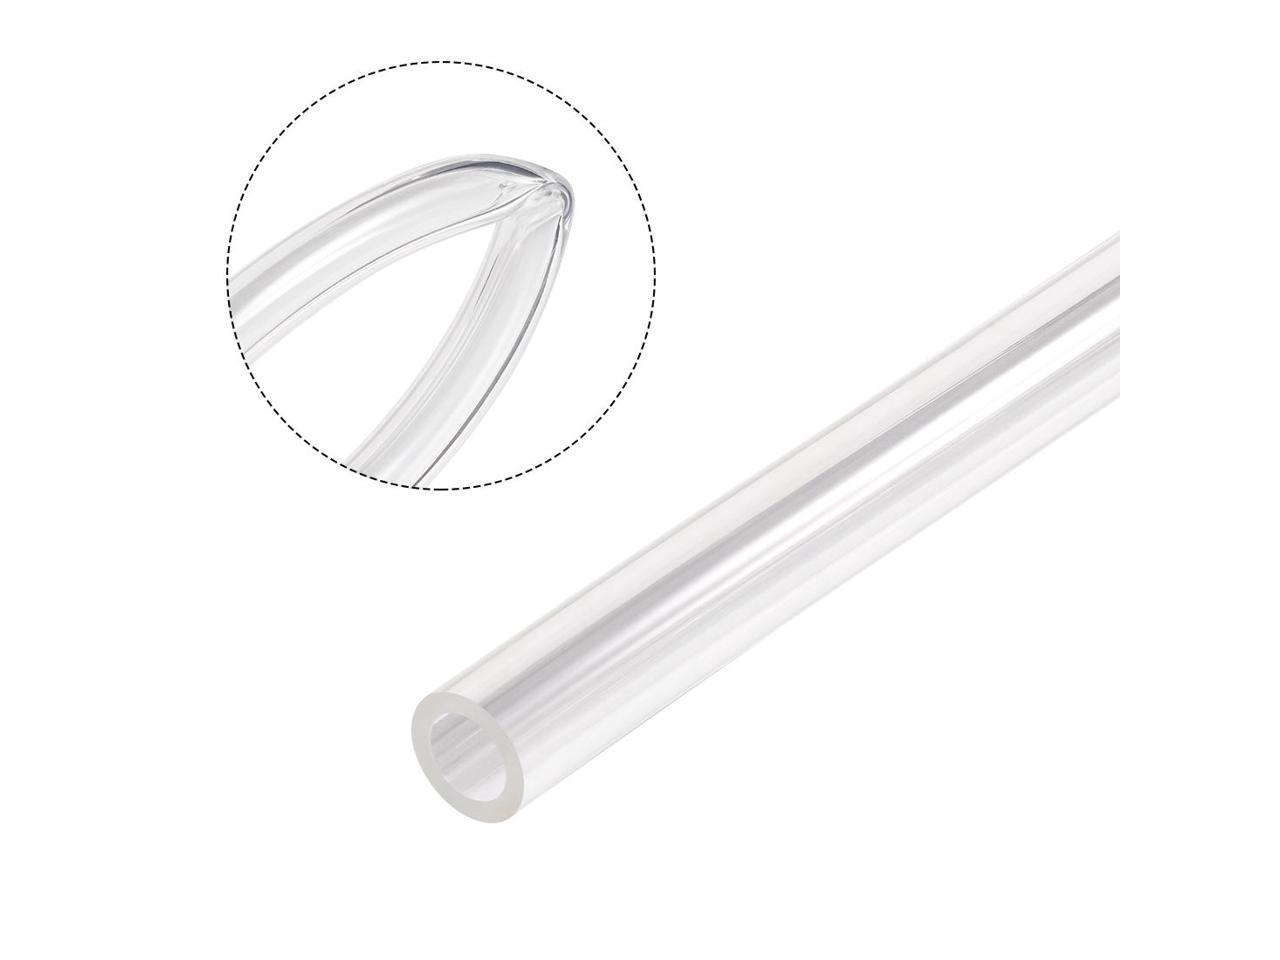 PVC Clear Vinly Tubing,8mm ID x 11mm OD,1Meter/3.28ft,Plastic Flexible Hose Tube 